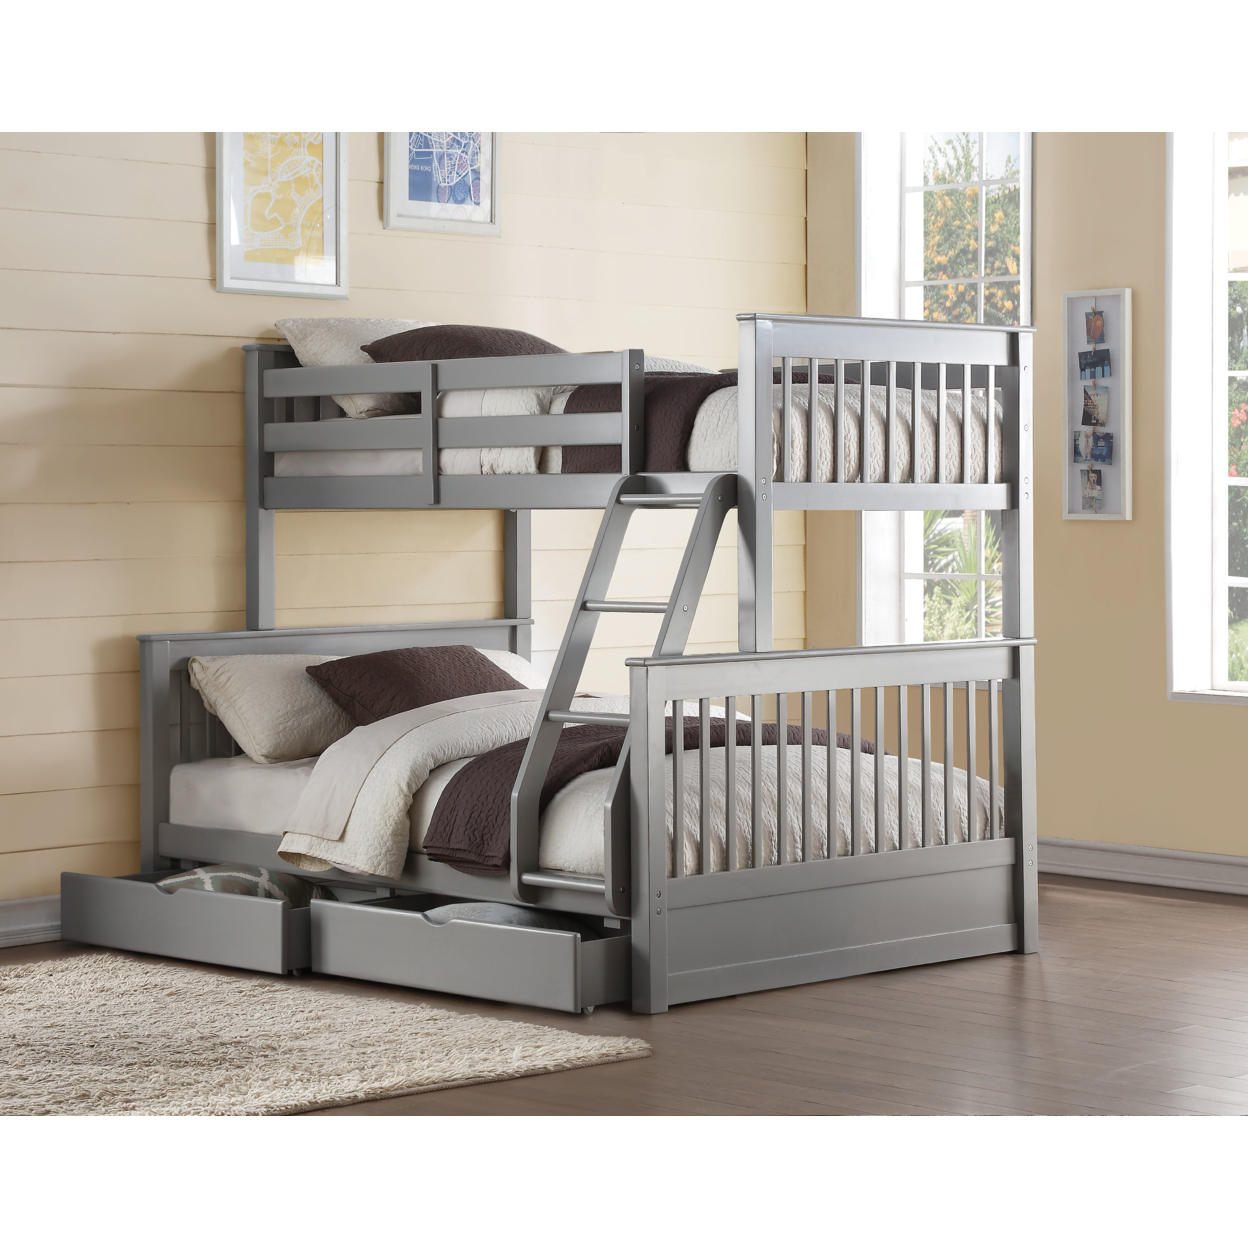 Wooden Twin Full Bunk Bed With 2 Drawers, Gray- Saltoro Sherpi